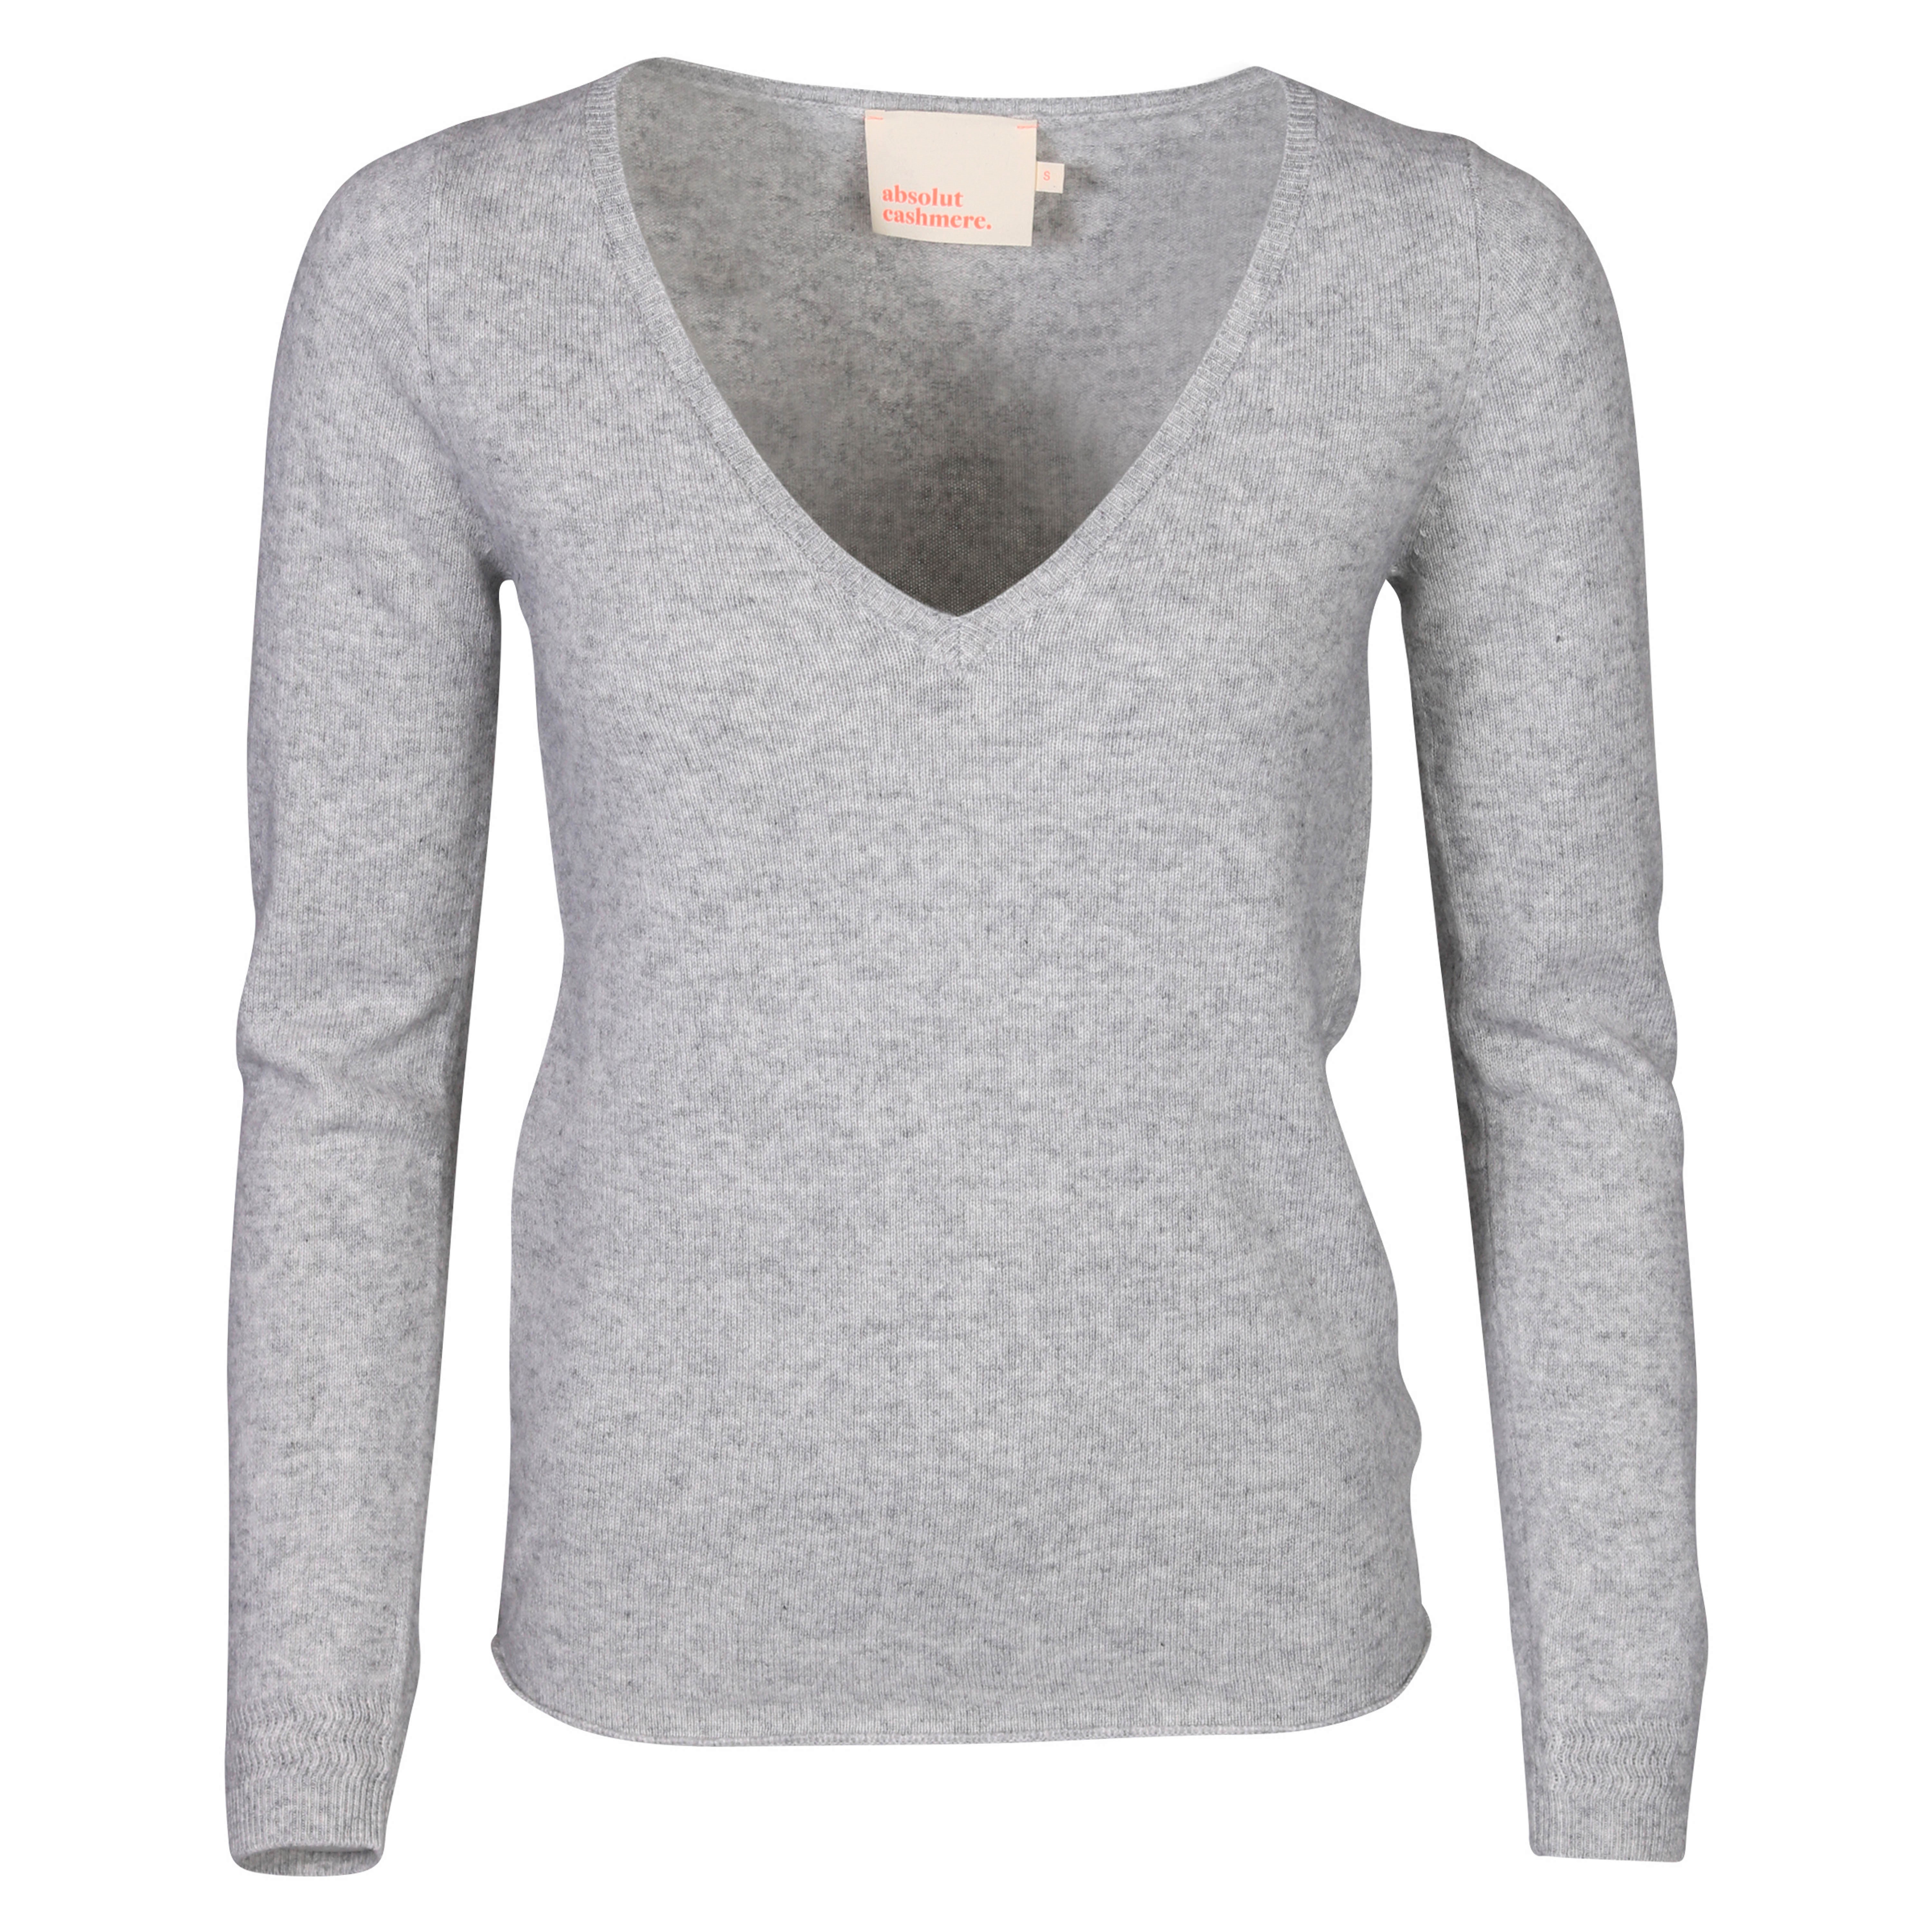 Absolut Cashmere Fitted V-Neck Sweater in Heathergrey M